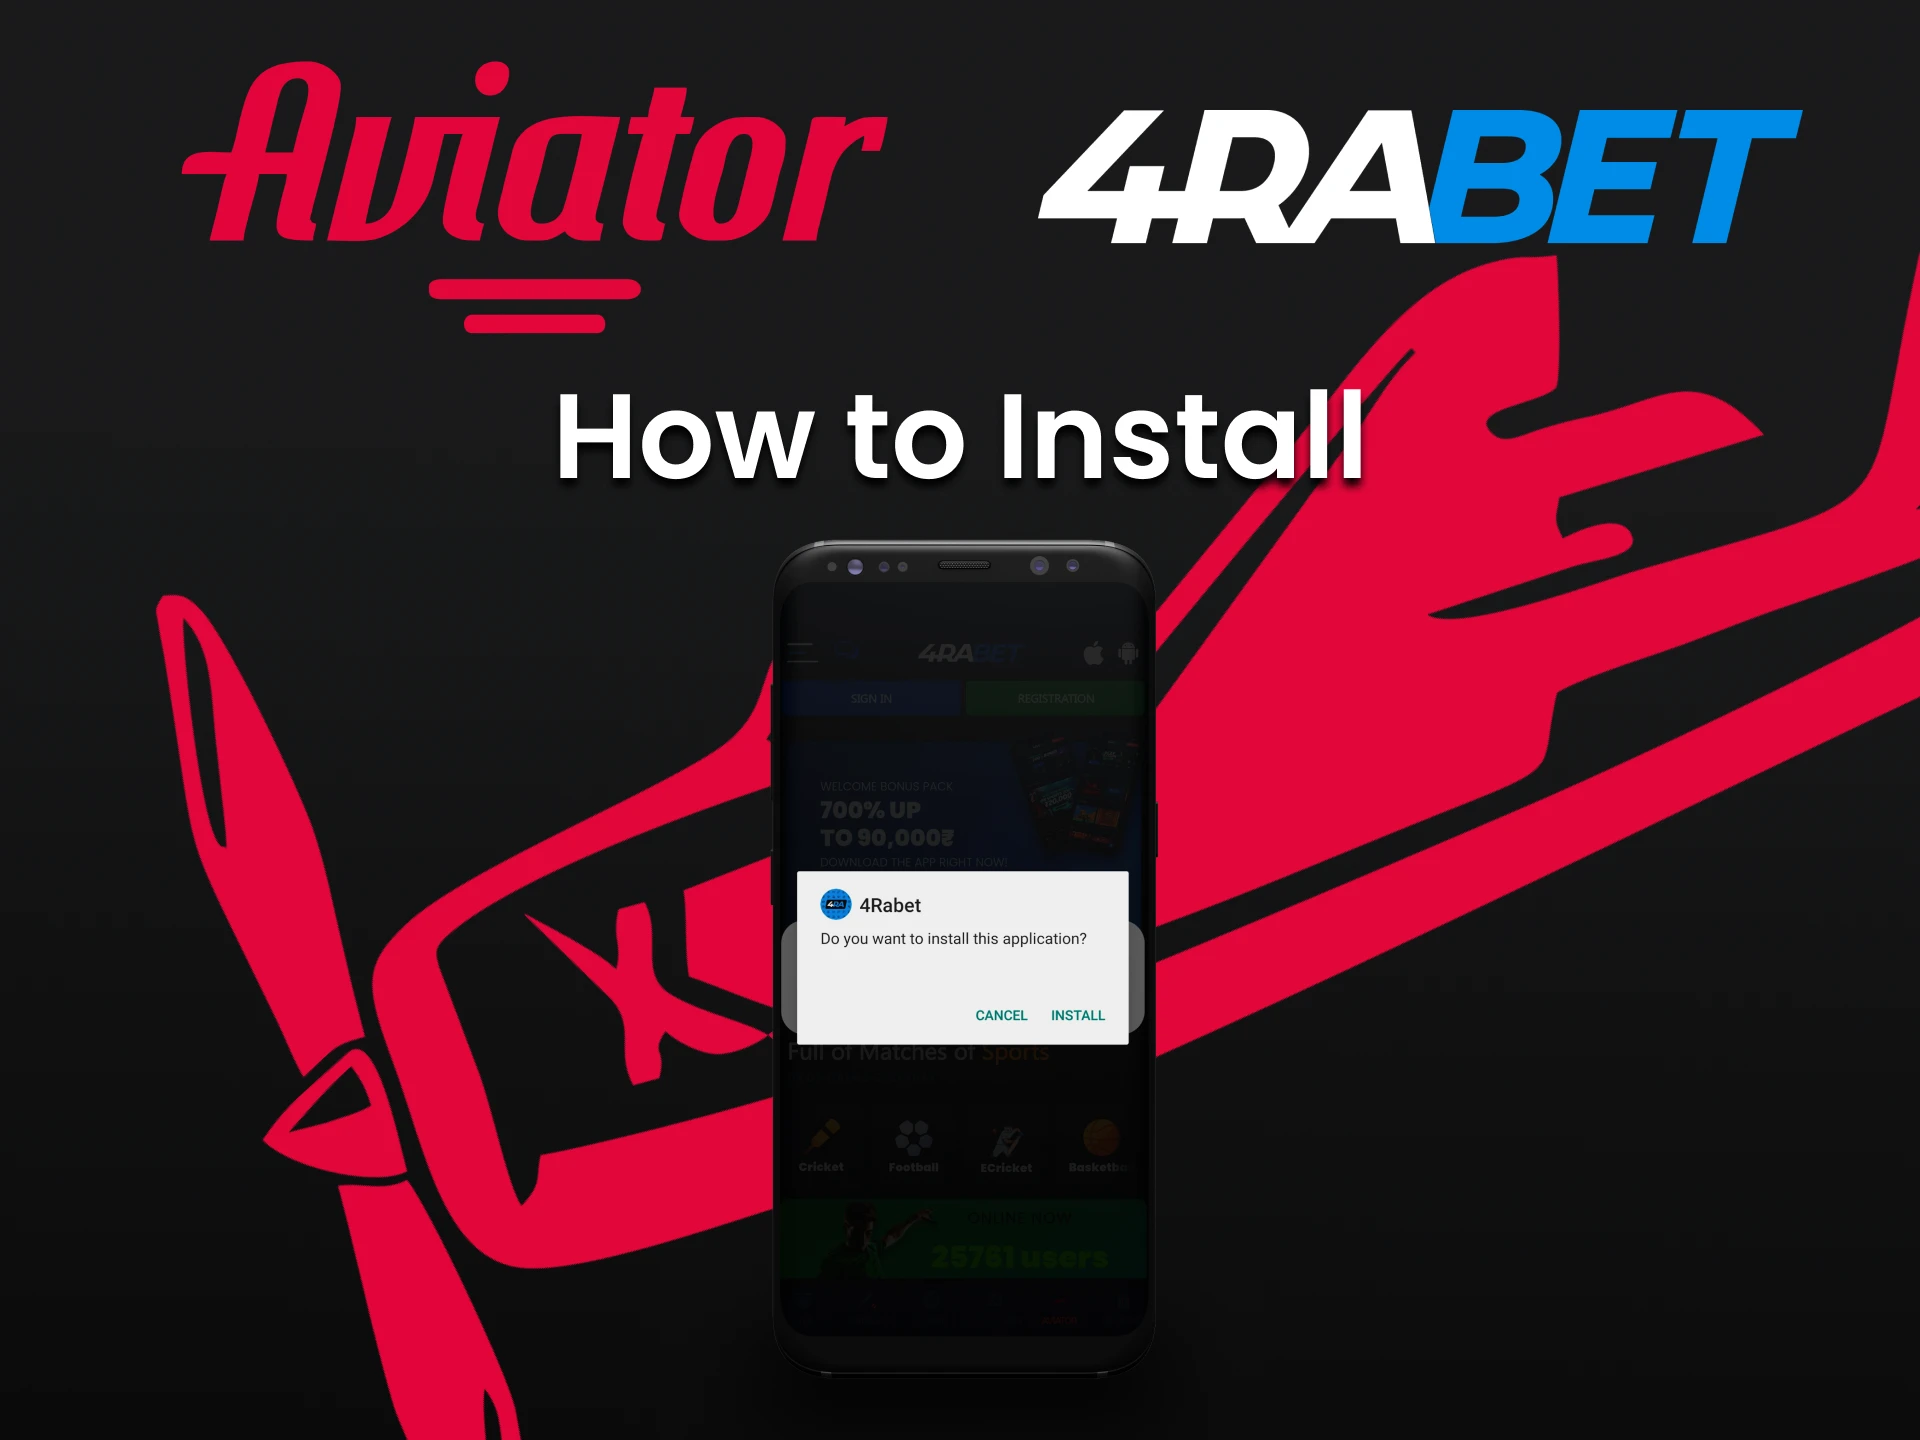 Install the 4rabet app for your phone.